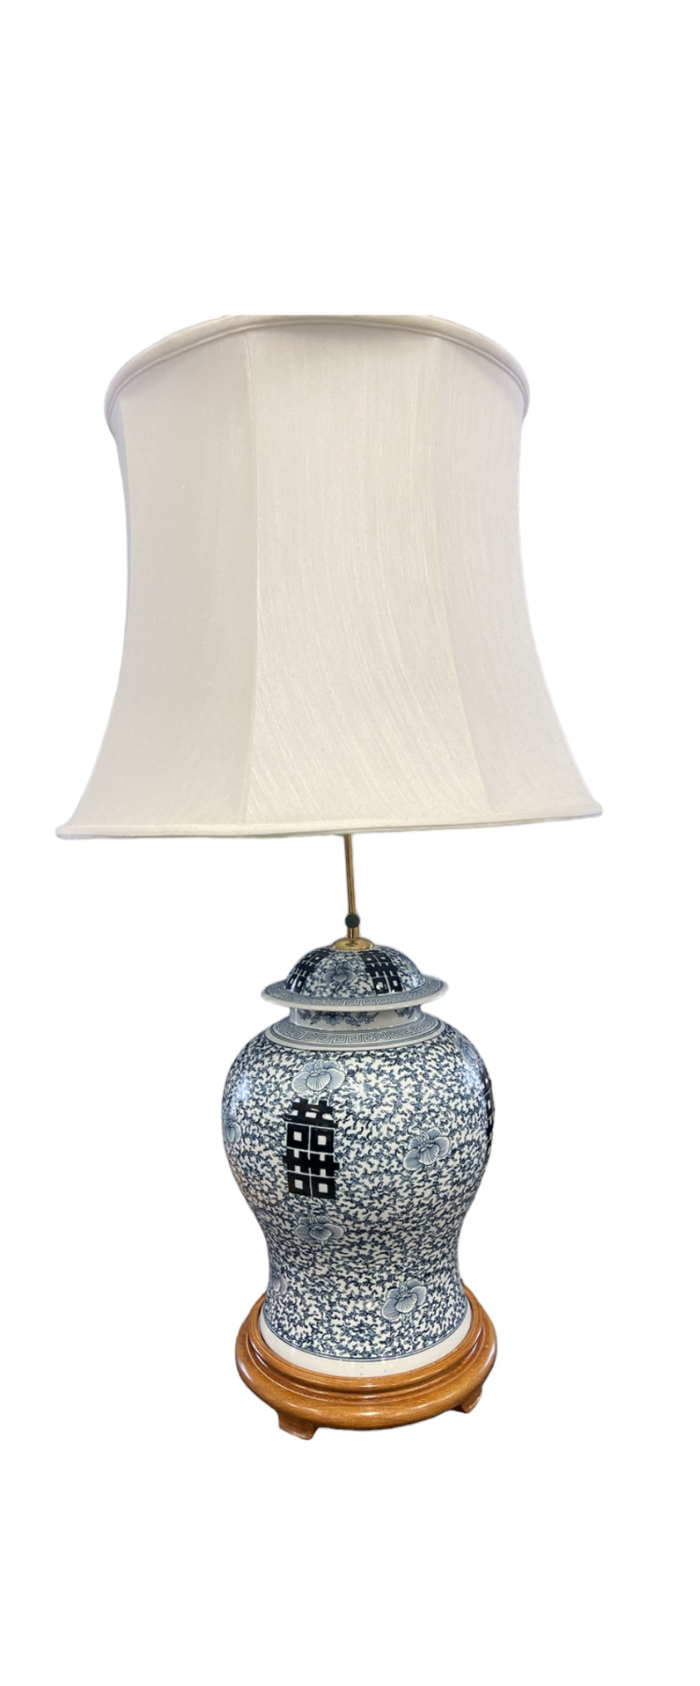 Double Happiness Blue and White Lamp